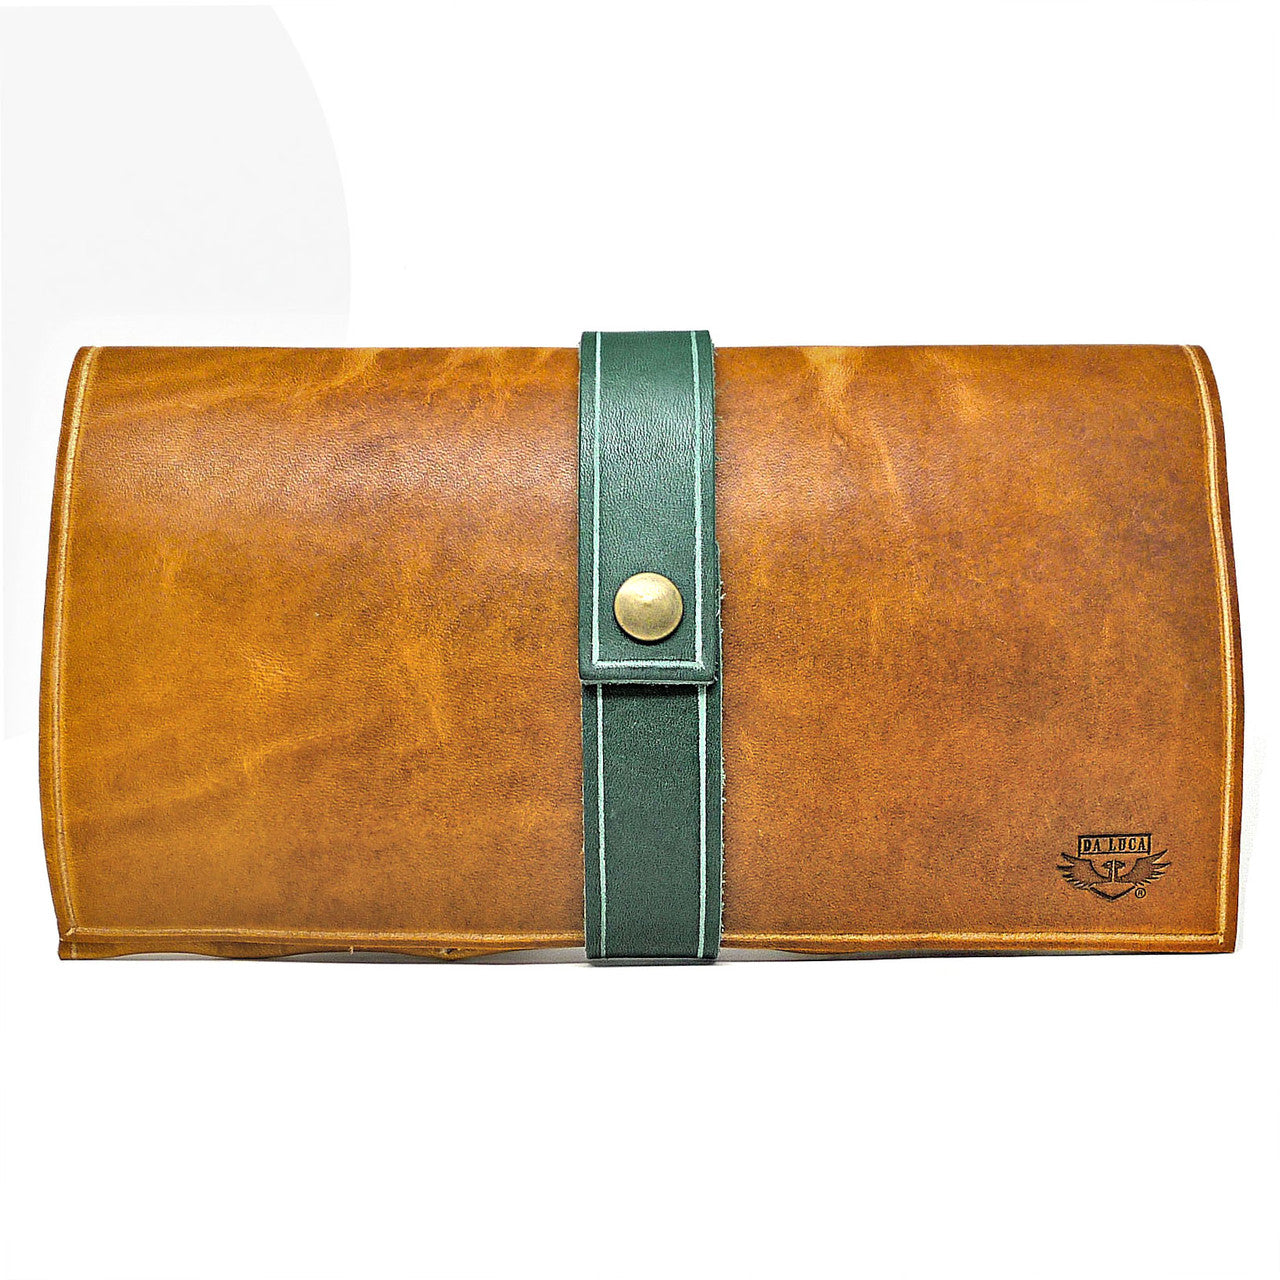 A Handmade Travel Watch Case From Genuine Horween Natural Dublin Leather By DaLuca Straps.